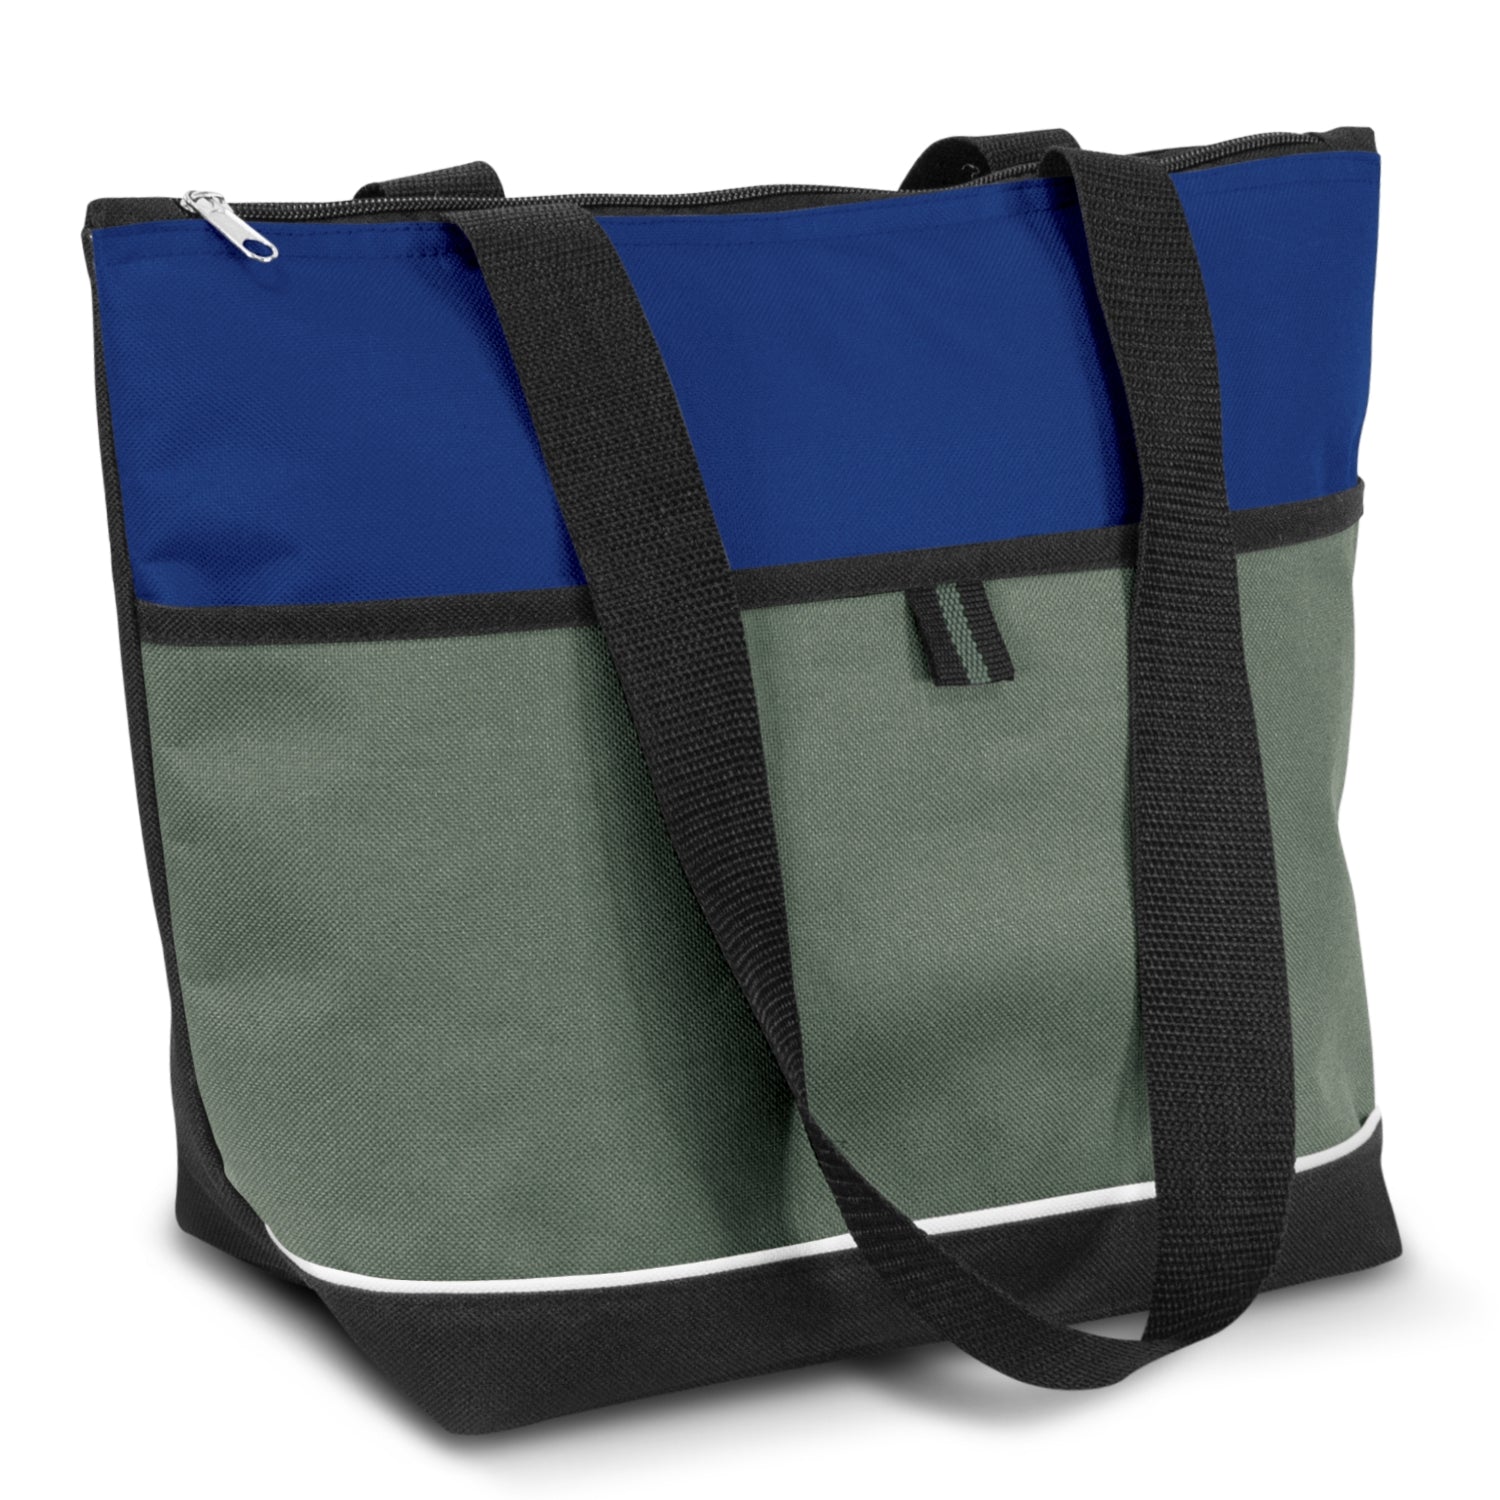 Diego Lunch Cooler Bag [115271]